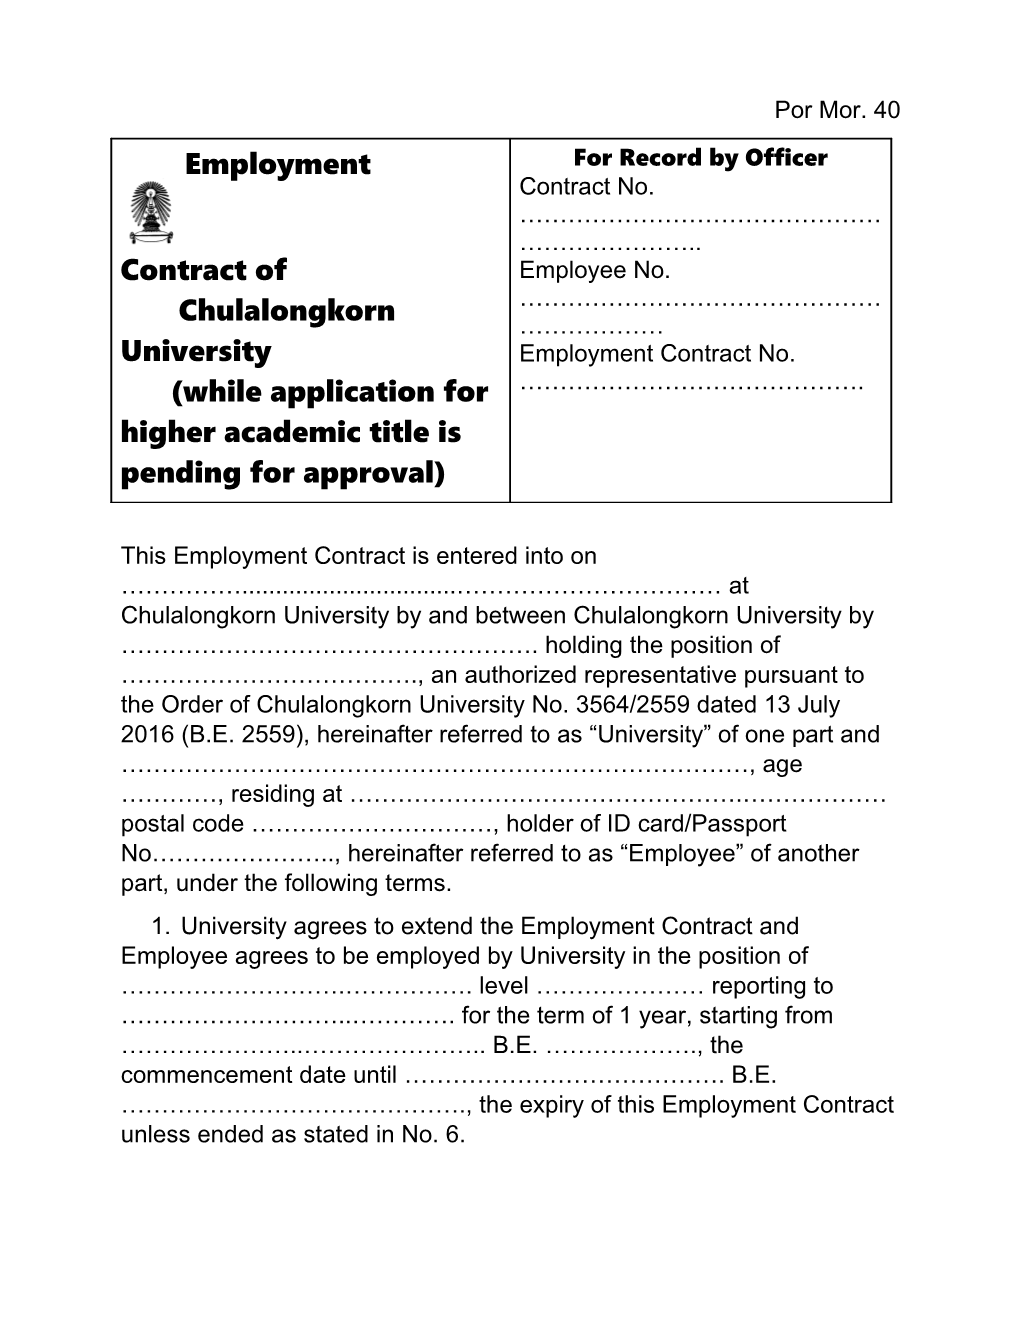 This Employment Contract Is Entered Into on at Chulalongkorn University by and Between